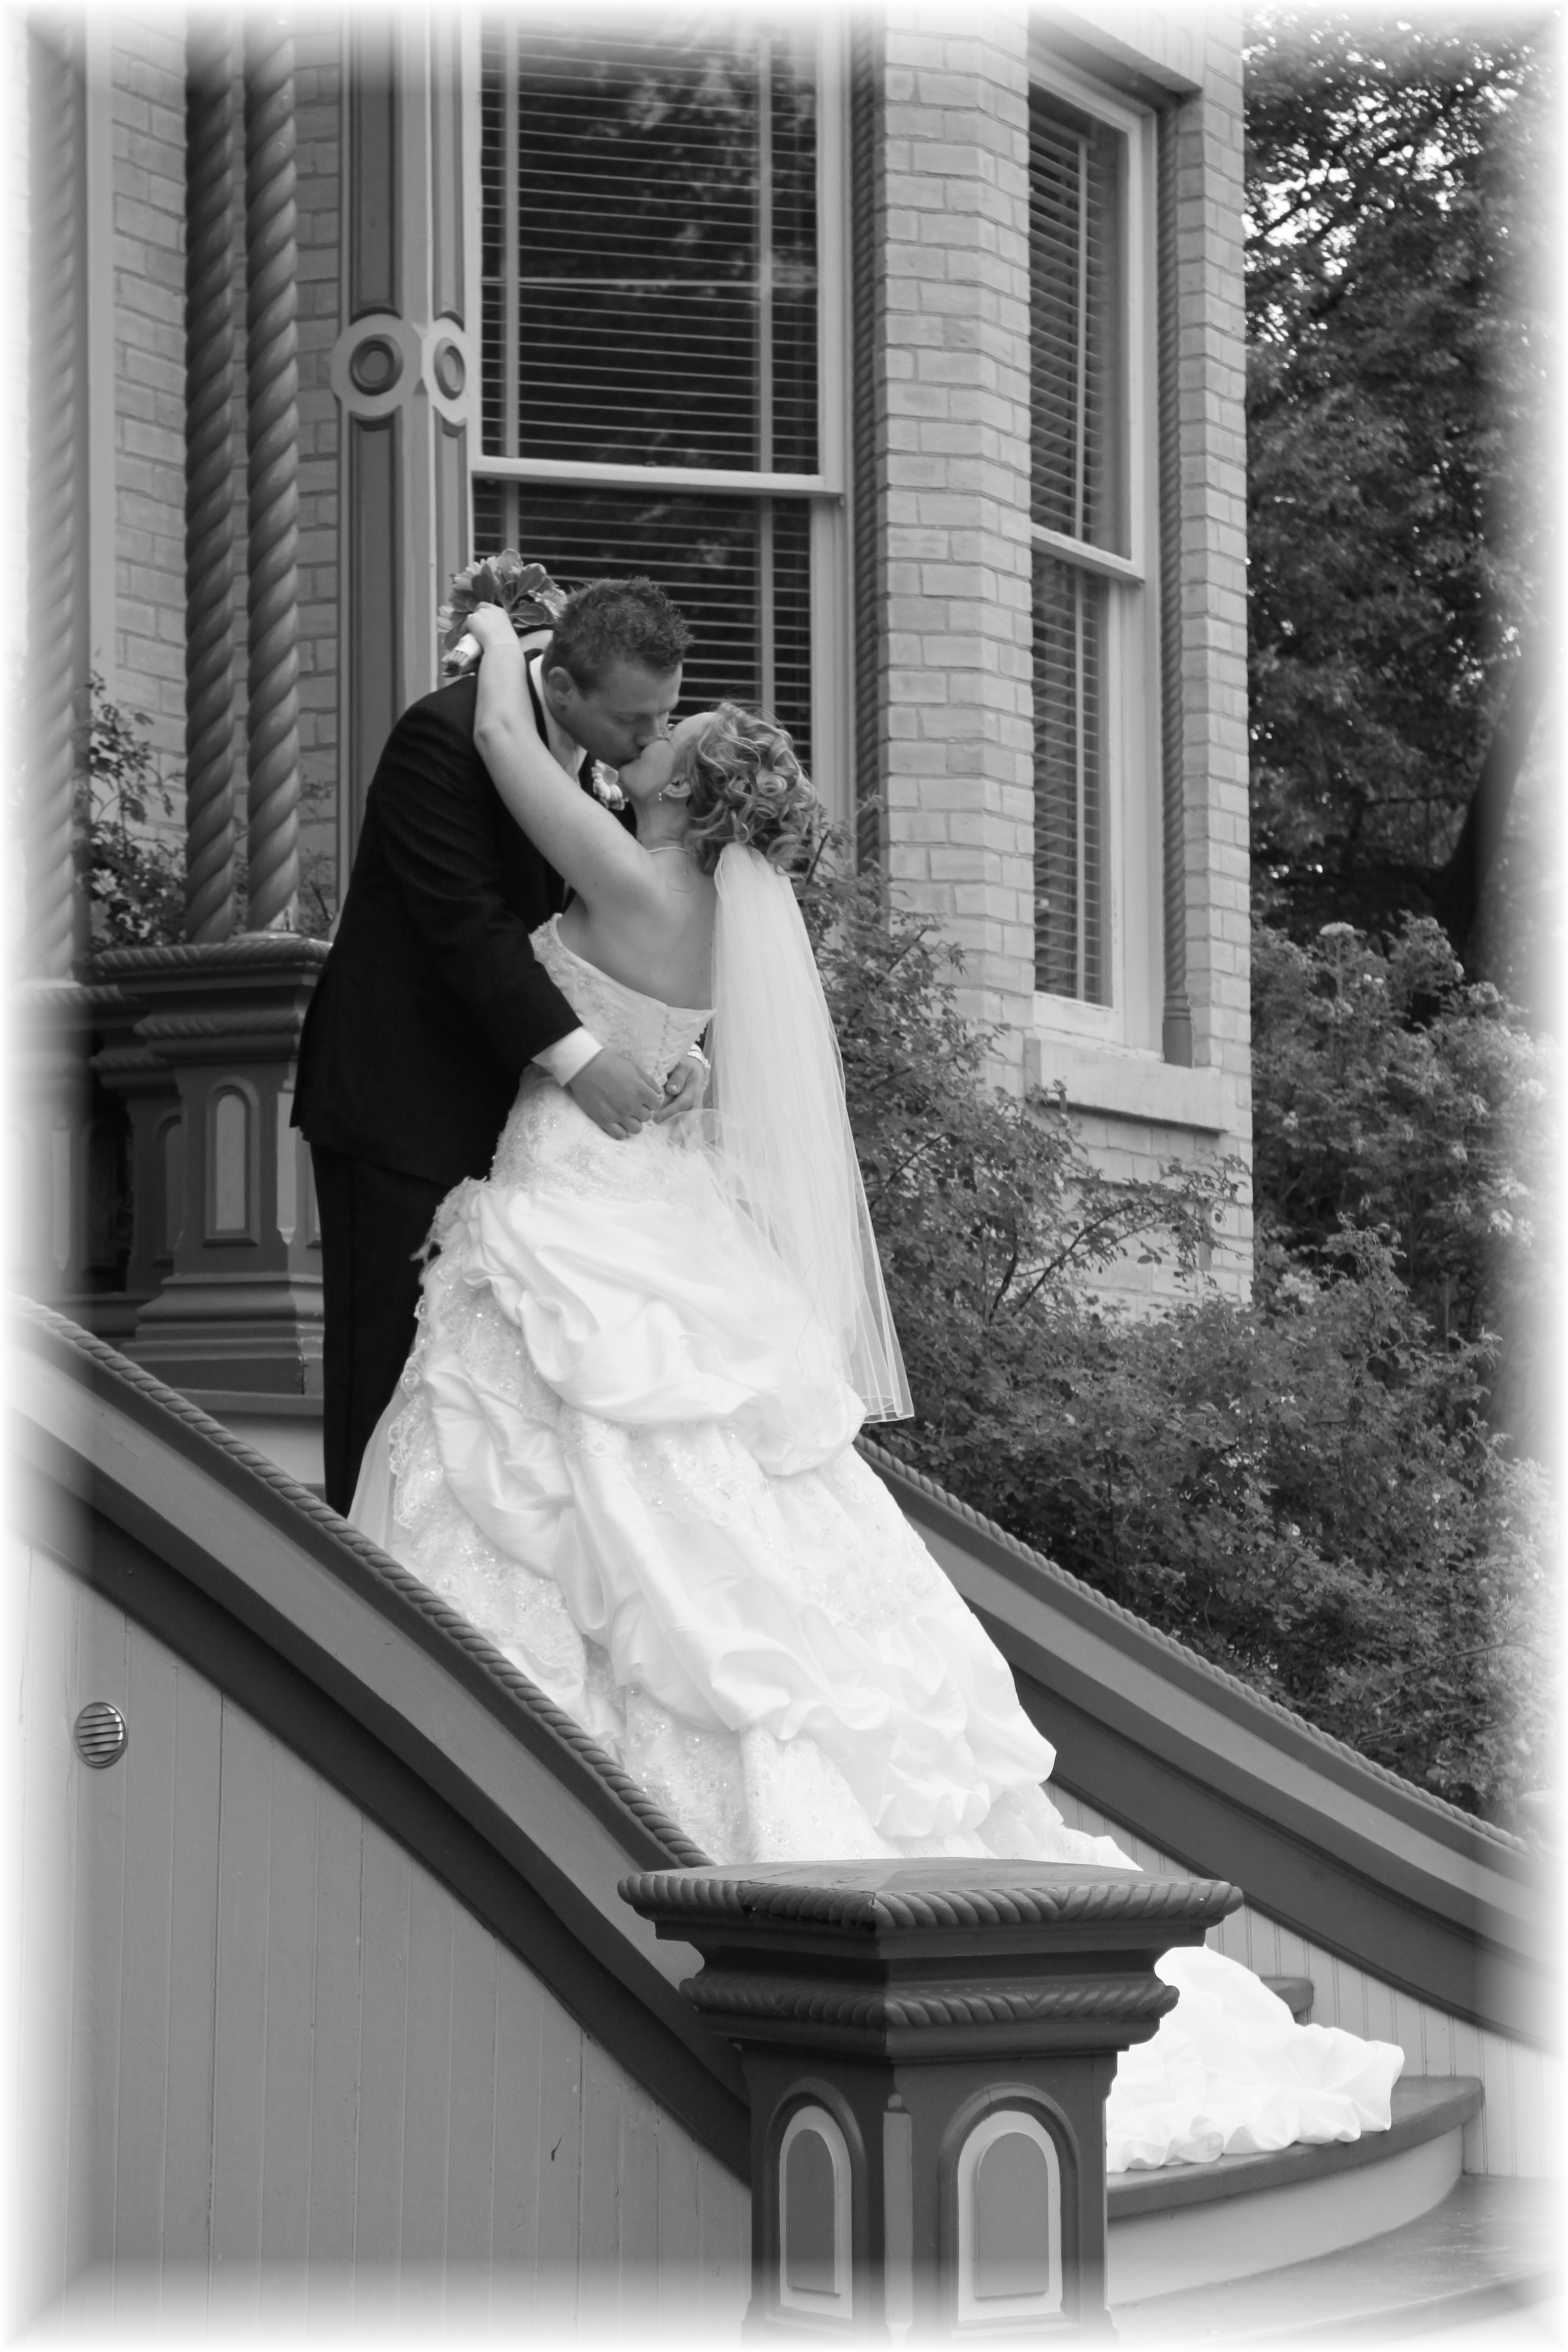 Newly-wed couple kissing on front steps